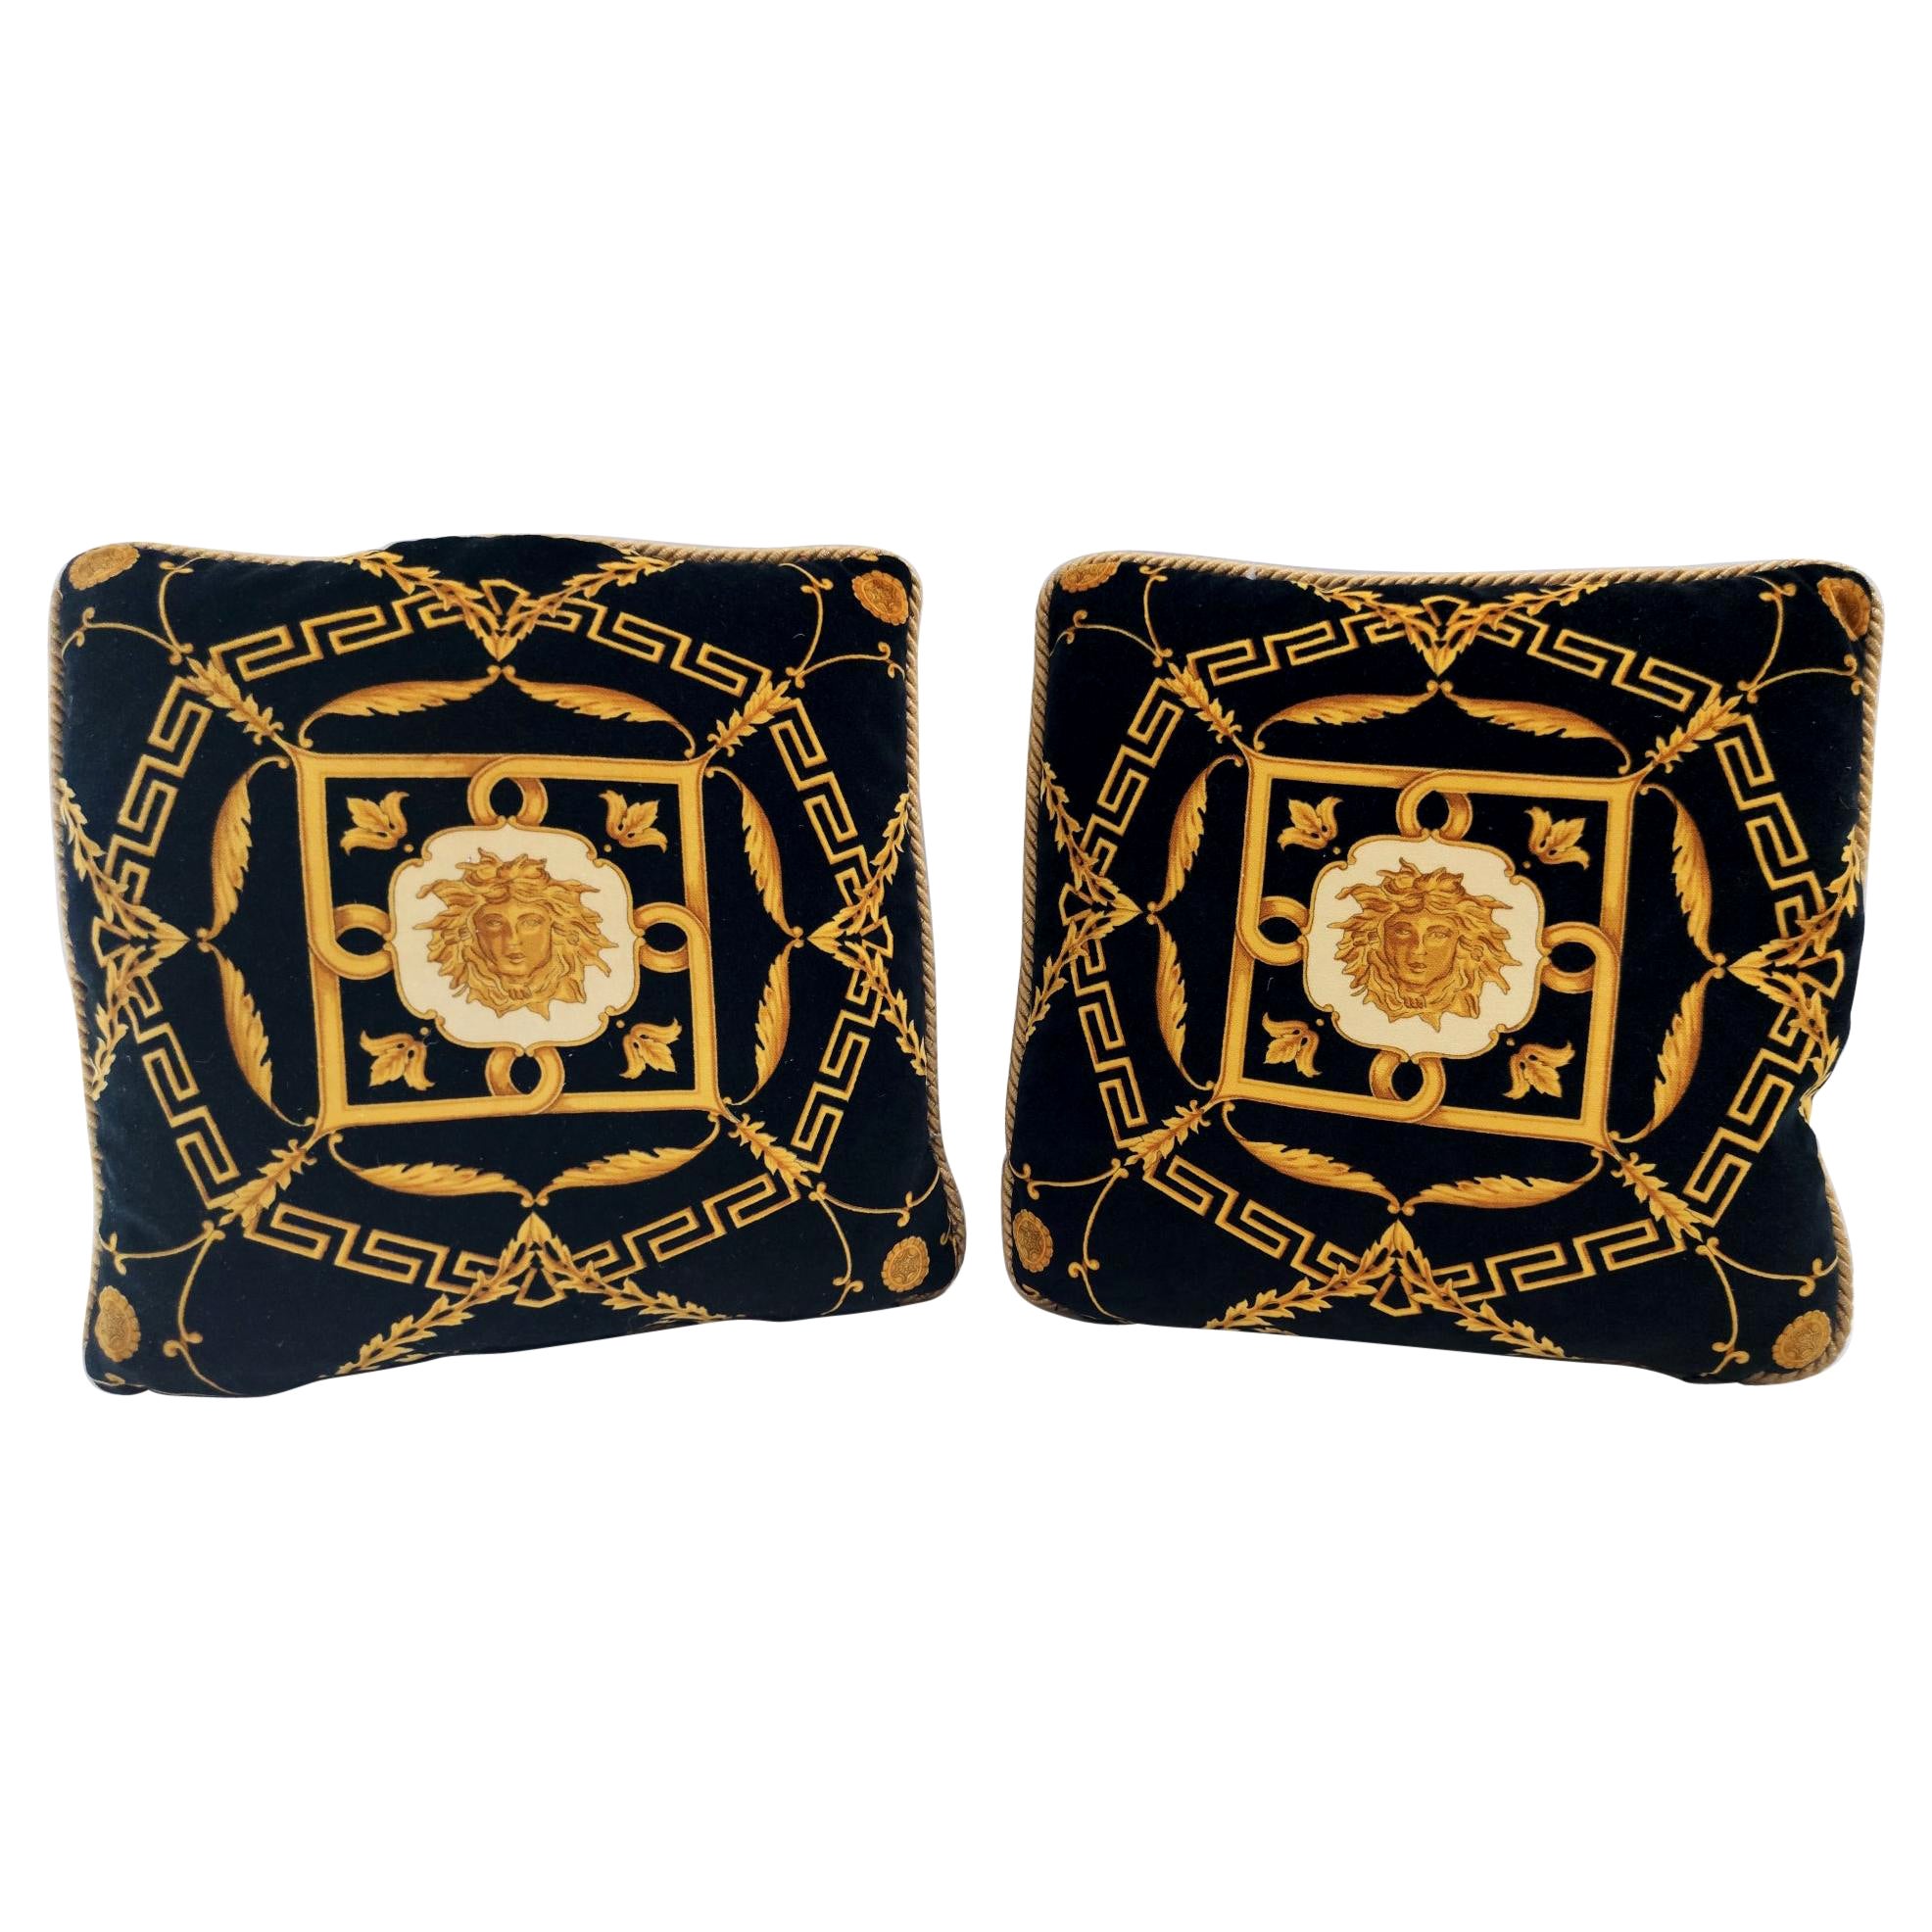 Pair of High-Quality Black Throw Pillows by Gianni Versace, Italy, 1980s-1990s For Sale